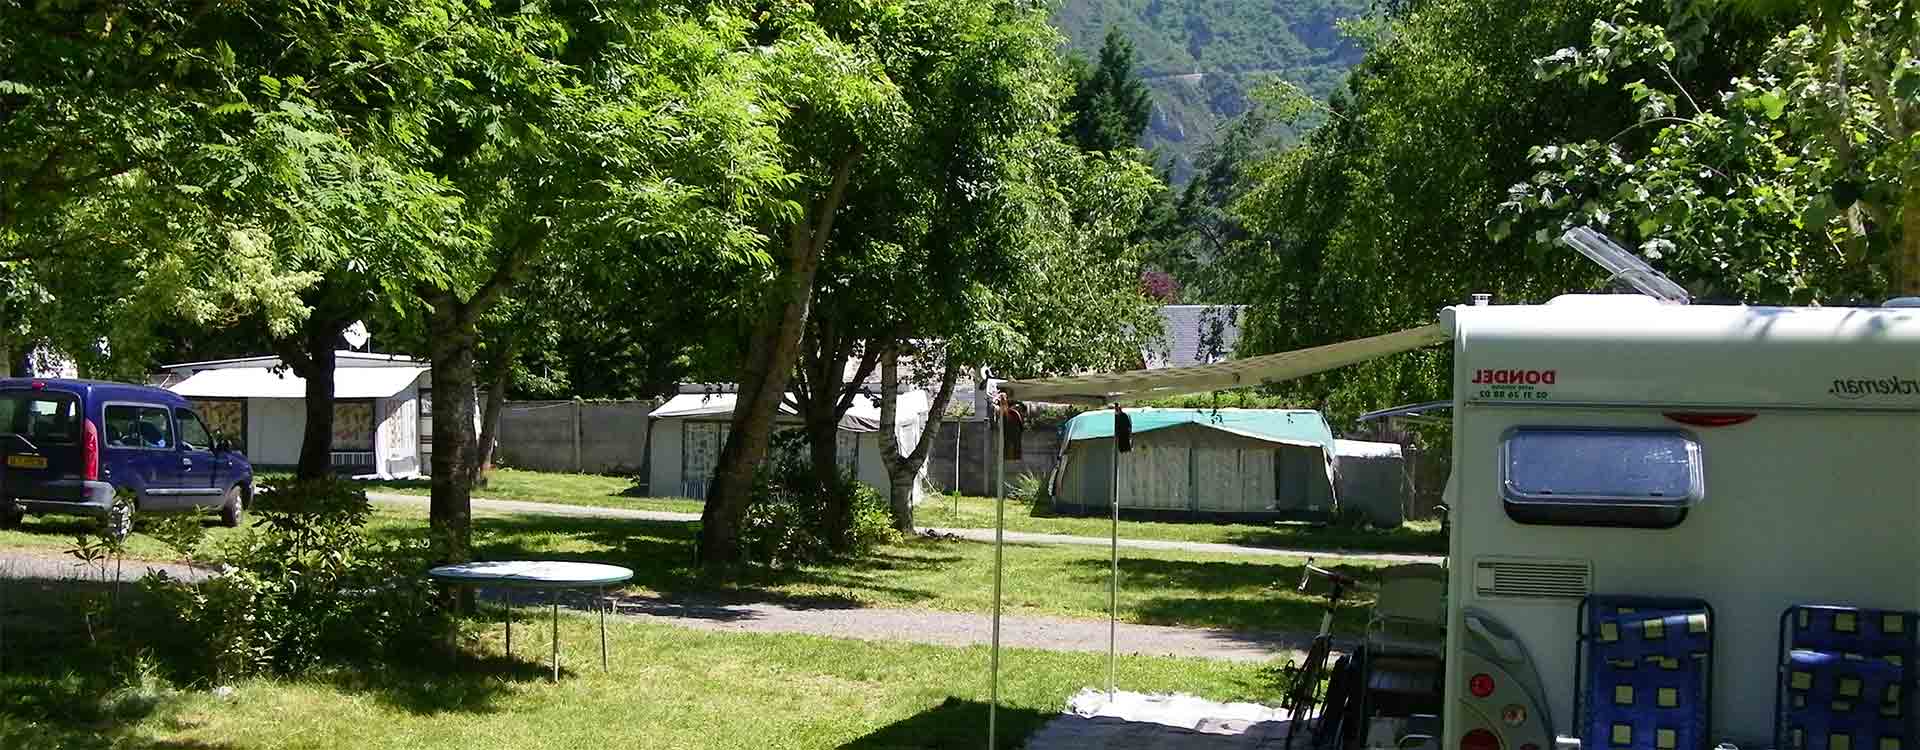 emplacement camping saint lary hautes pyrenees